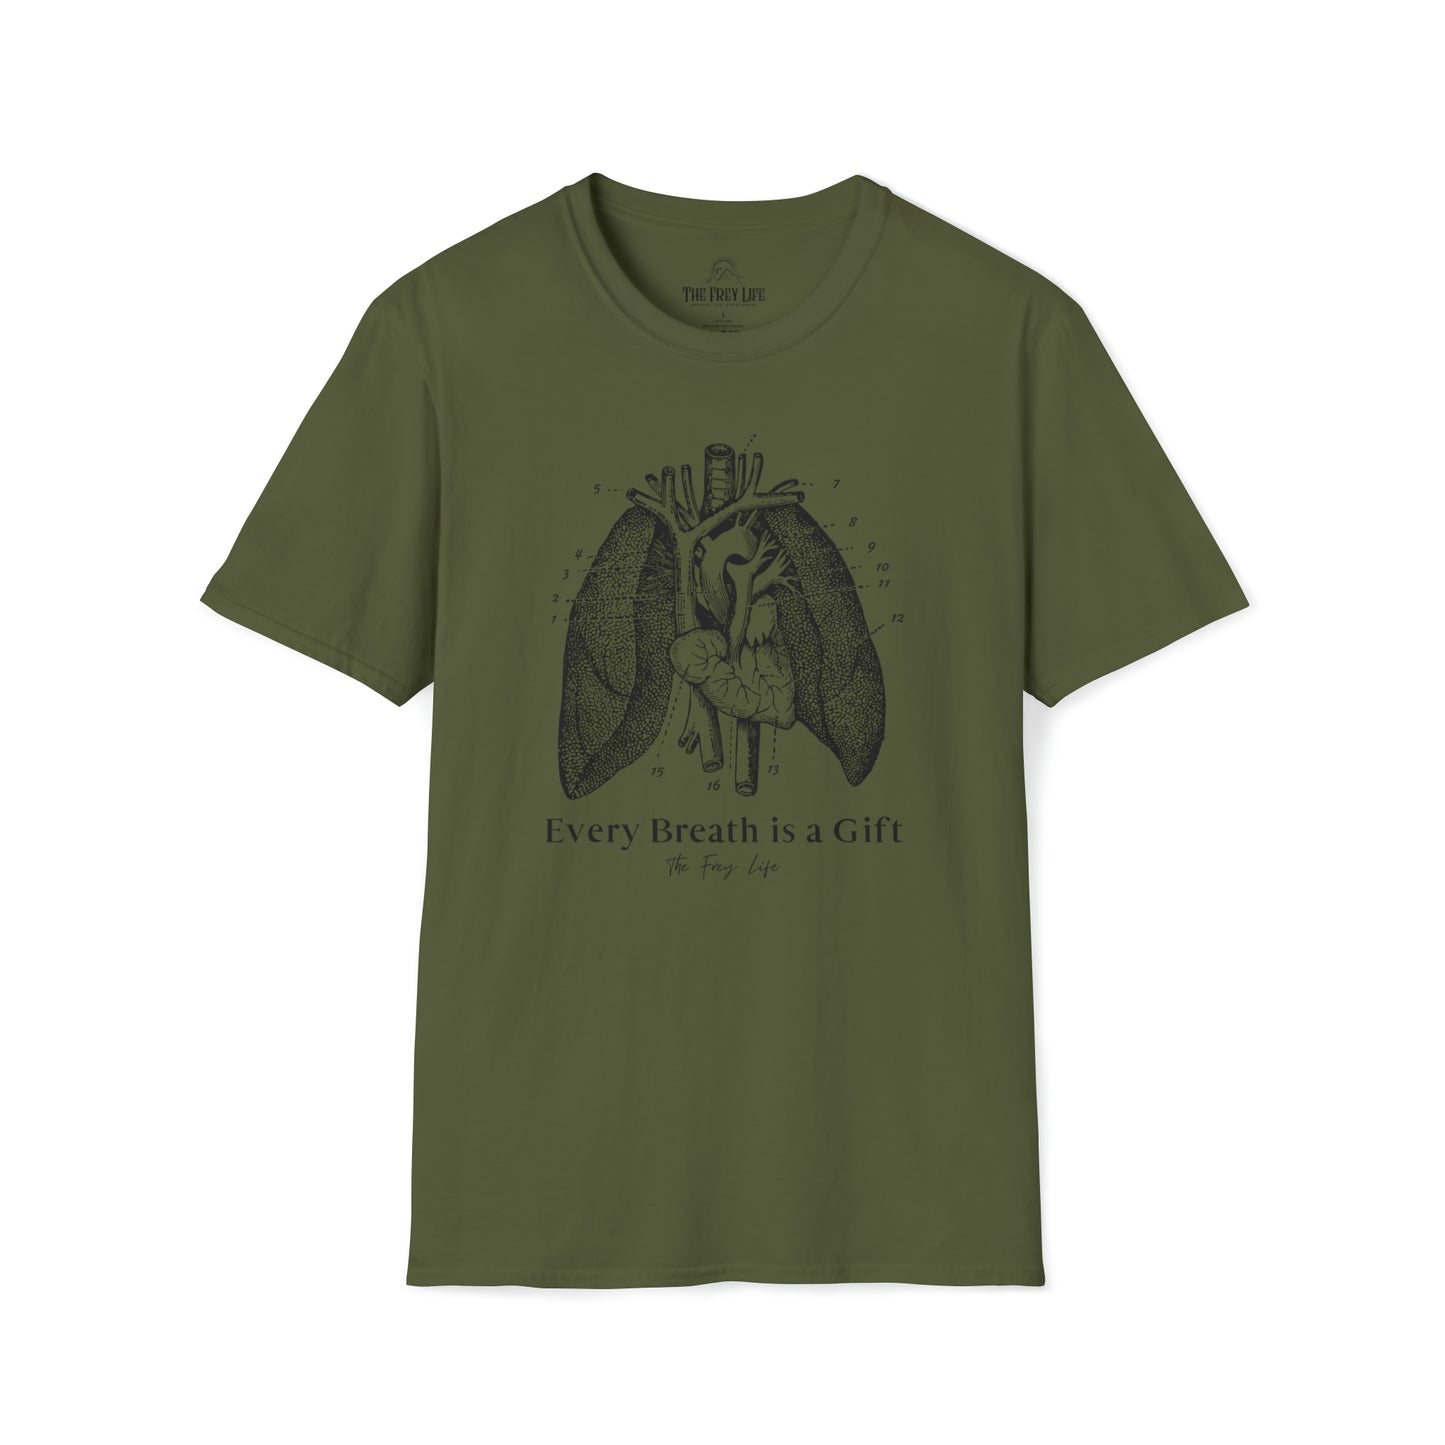 Every Breath is a Gift T-Shirt